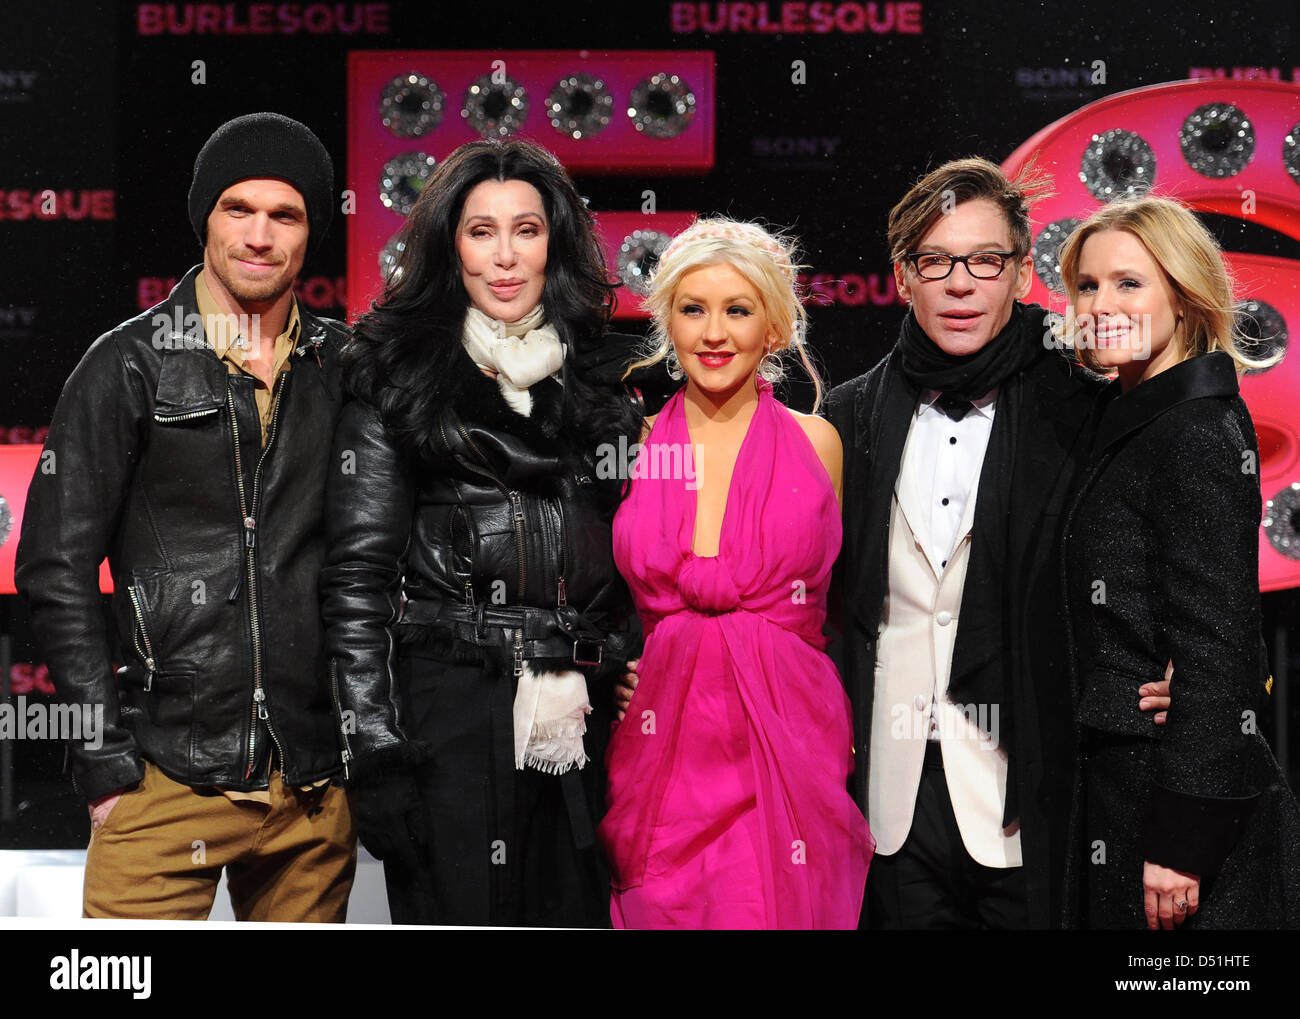 (L-R) US actress Kristen Bell, US singer and actress Cher, US singer and actress Christina Aguilera and US director Steve Antin attend the Germany premiere of the film 'Burlesque' in Berlin, Germany, 16 December, 2010. 'Burlesque' is in German cinemas from 06 January 2011 on. Photo: Jens Kalaene Stock Photo